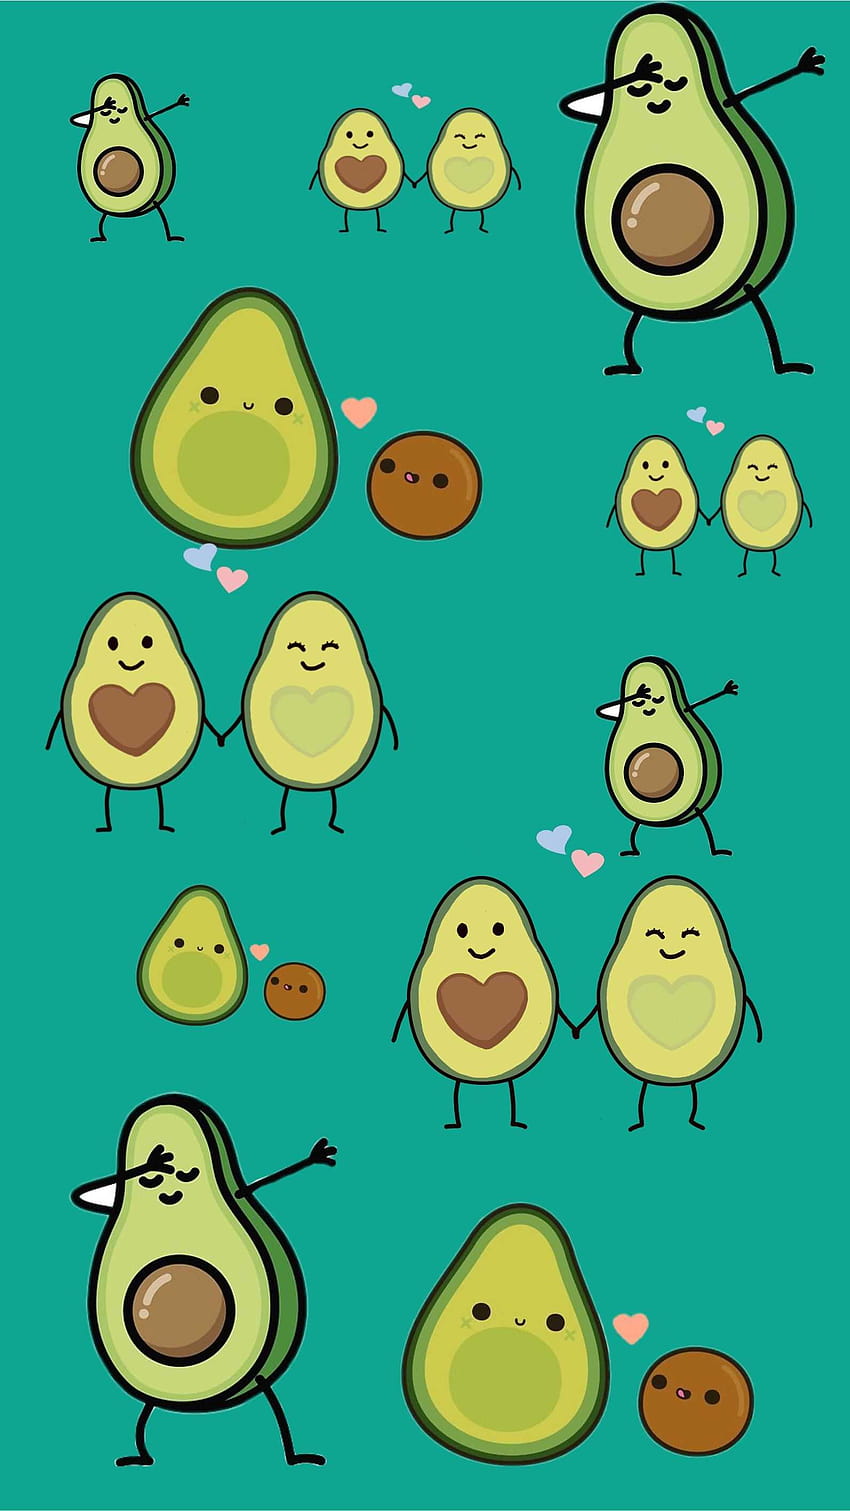 IPhone wallpaper of an avocado family with brown pits on a blue background - Avocado